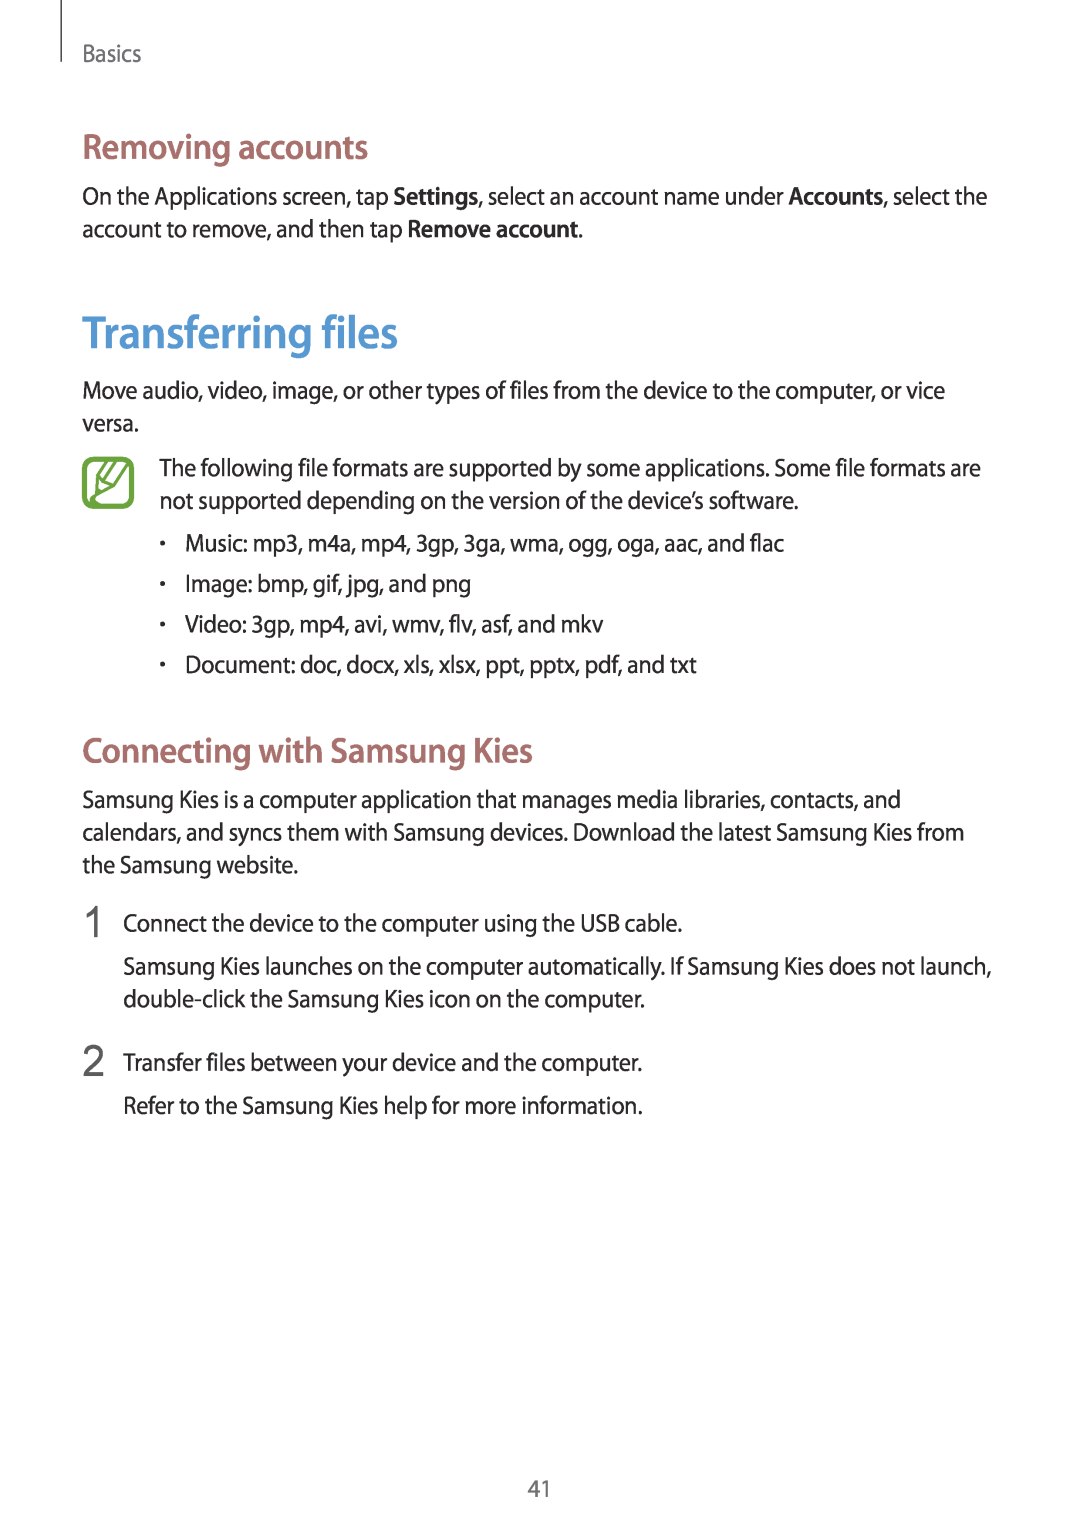 Samsung GT-N5100 user manual Transferring files, Removing accounts, Connecting with Samsung Kies, Basics 